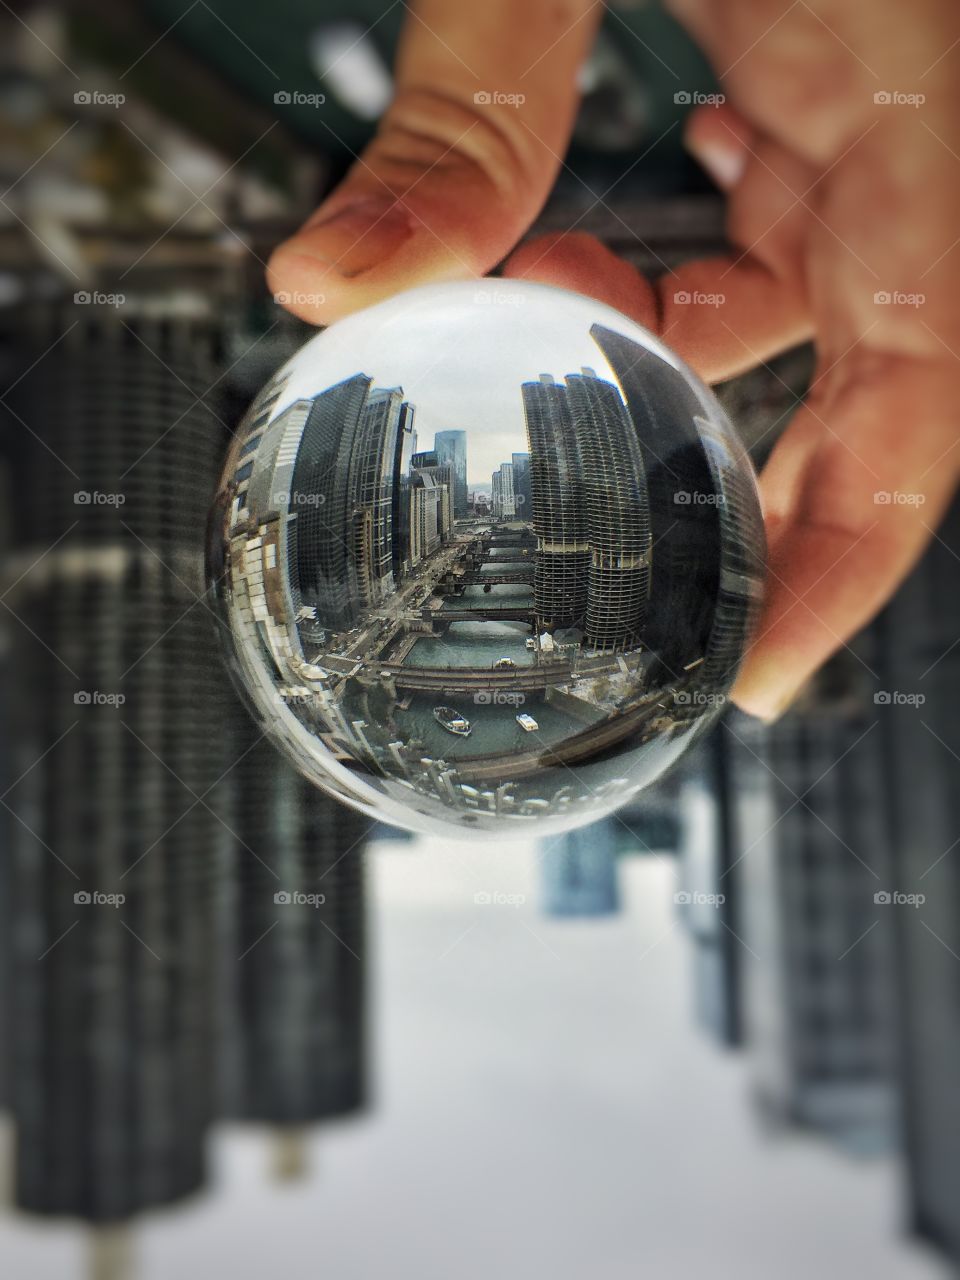 Reflection of the Chicago River in a crystal ball